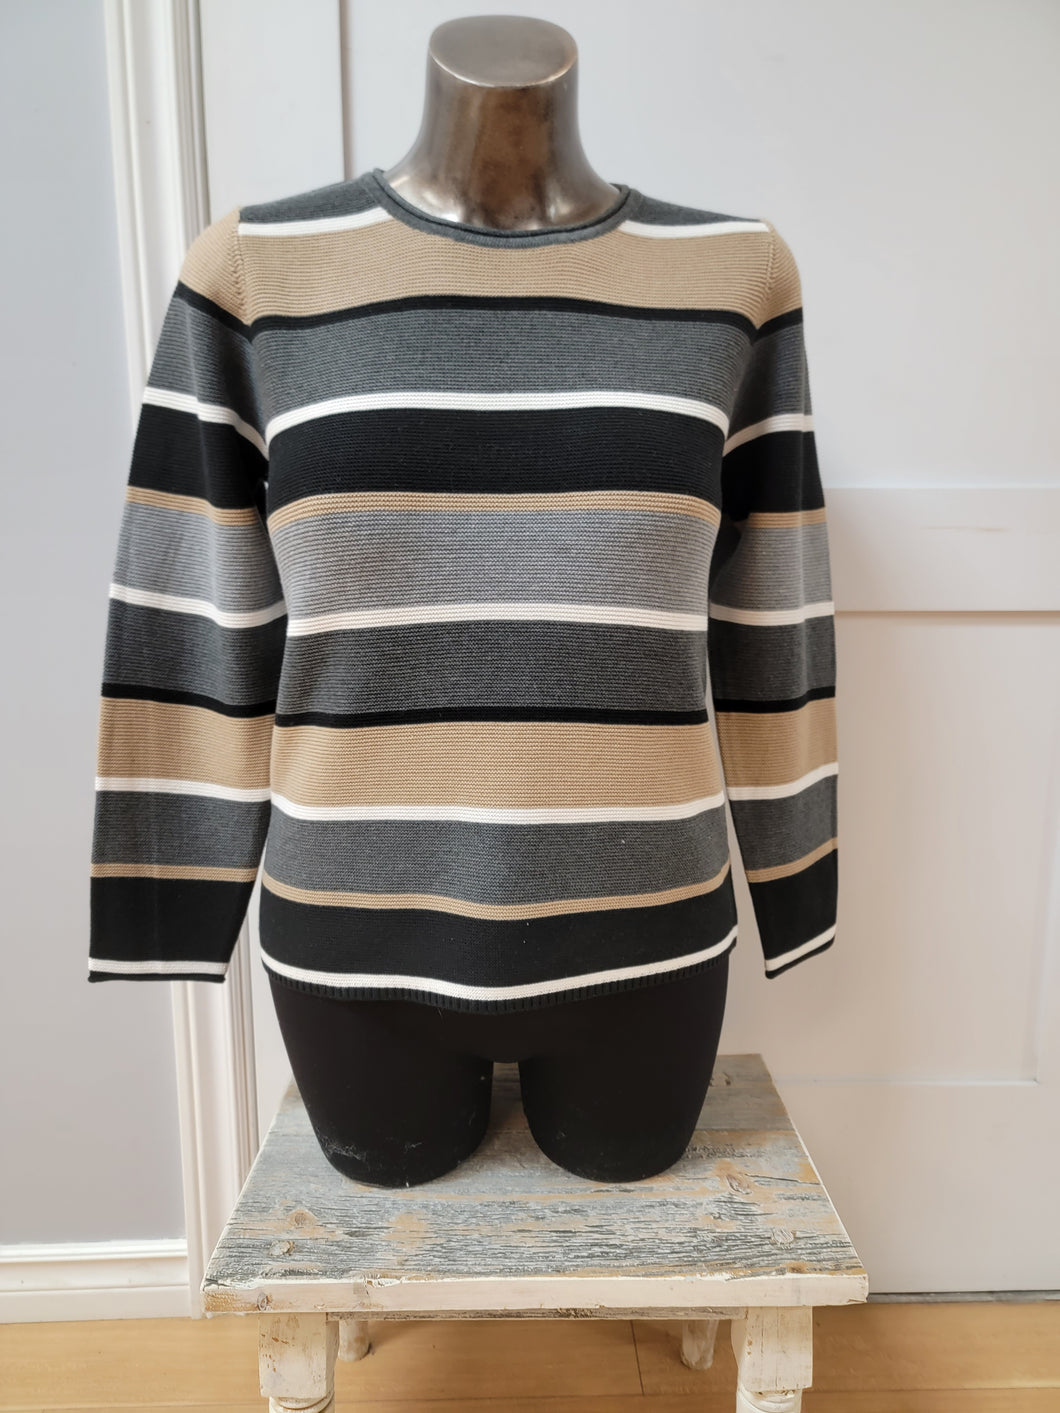 Striped Sweater by Sunday available in plus sizes